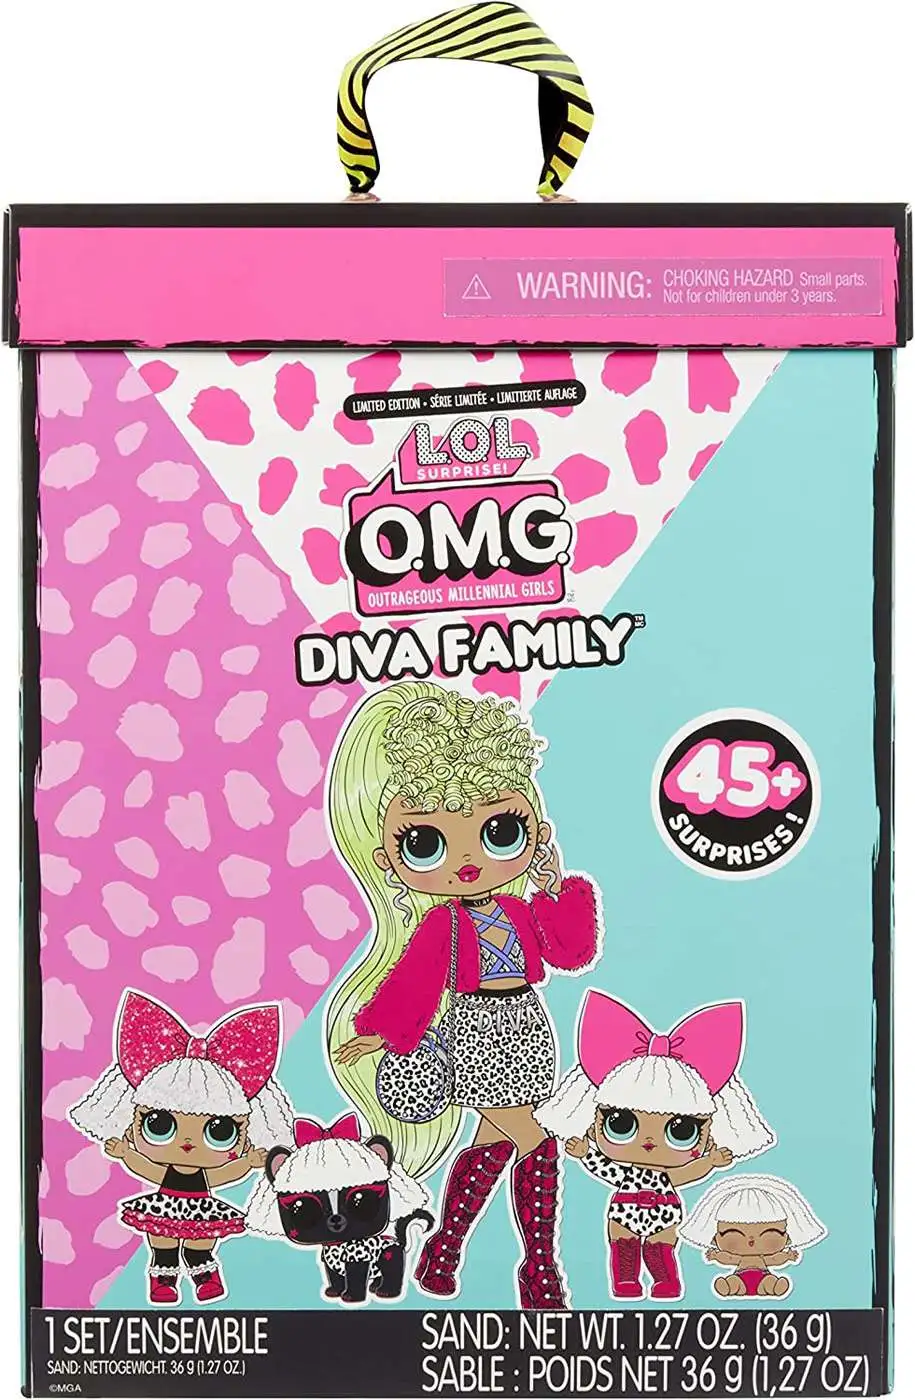 LOL Surprise OMG Lady Diva Fashion Doll with Multiple Surprises